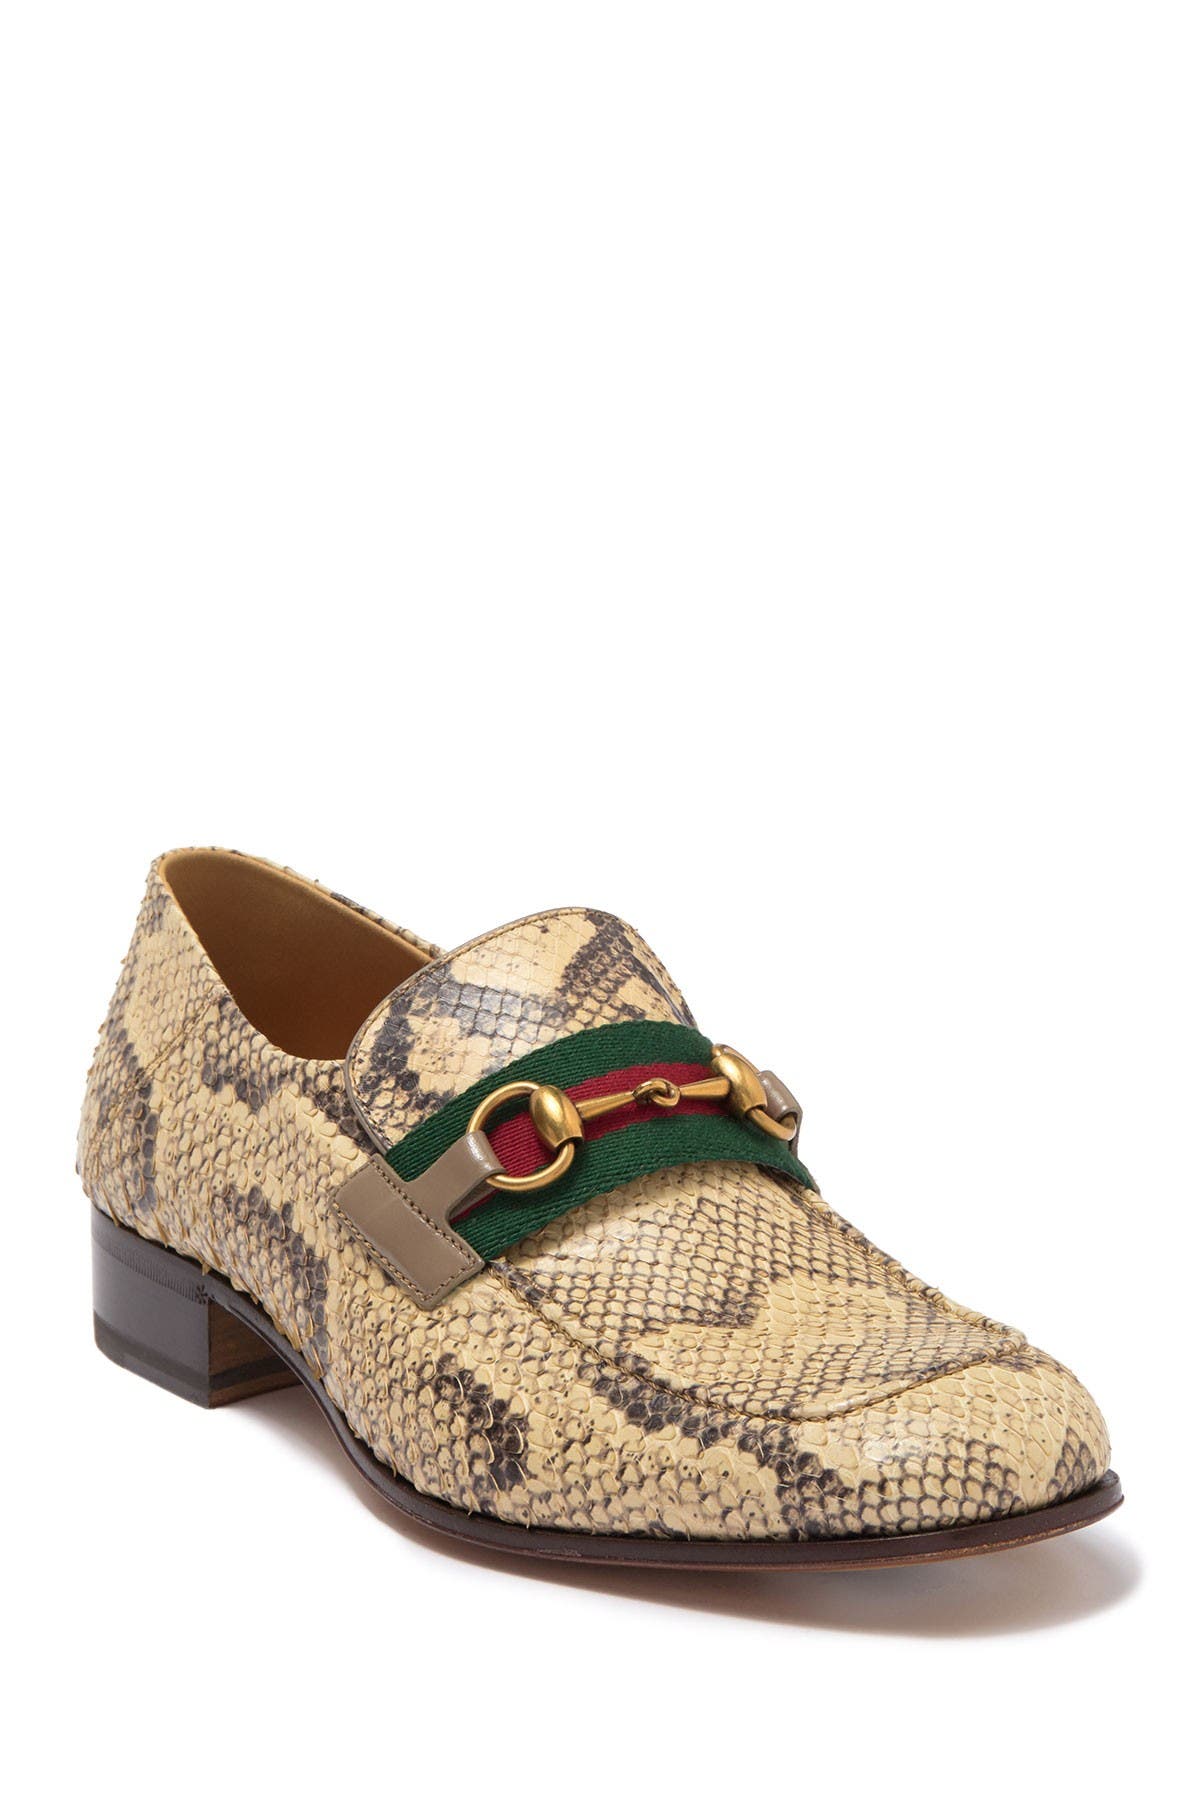 gucci loafers nordstrom